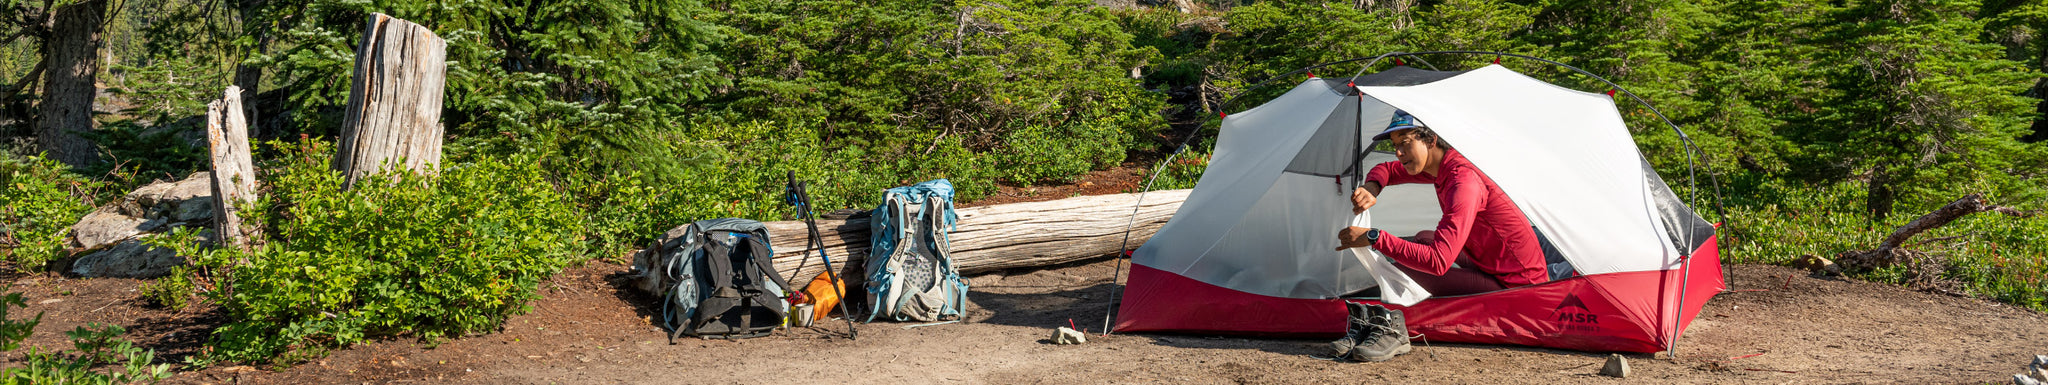 Cleaning camping equipment and accessories properly